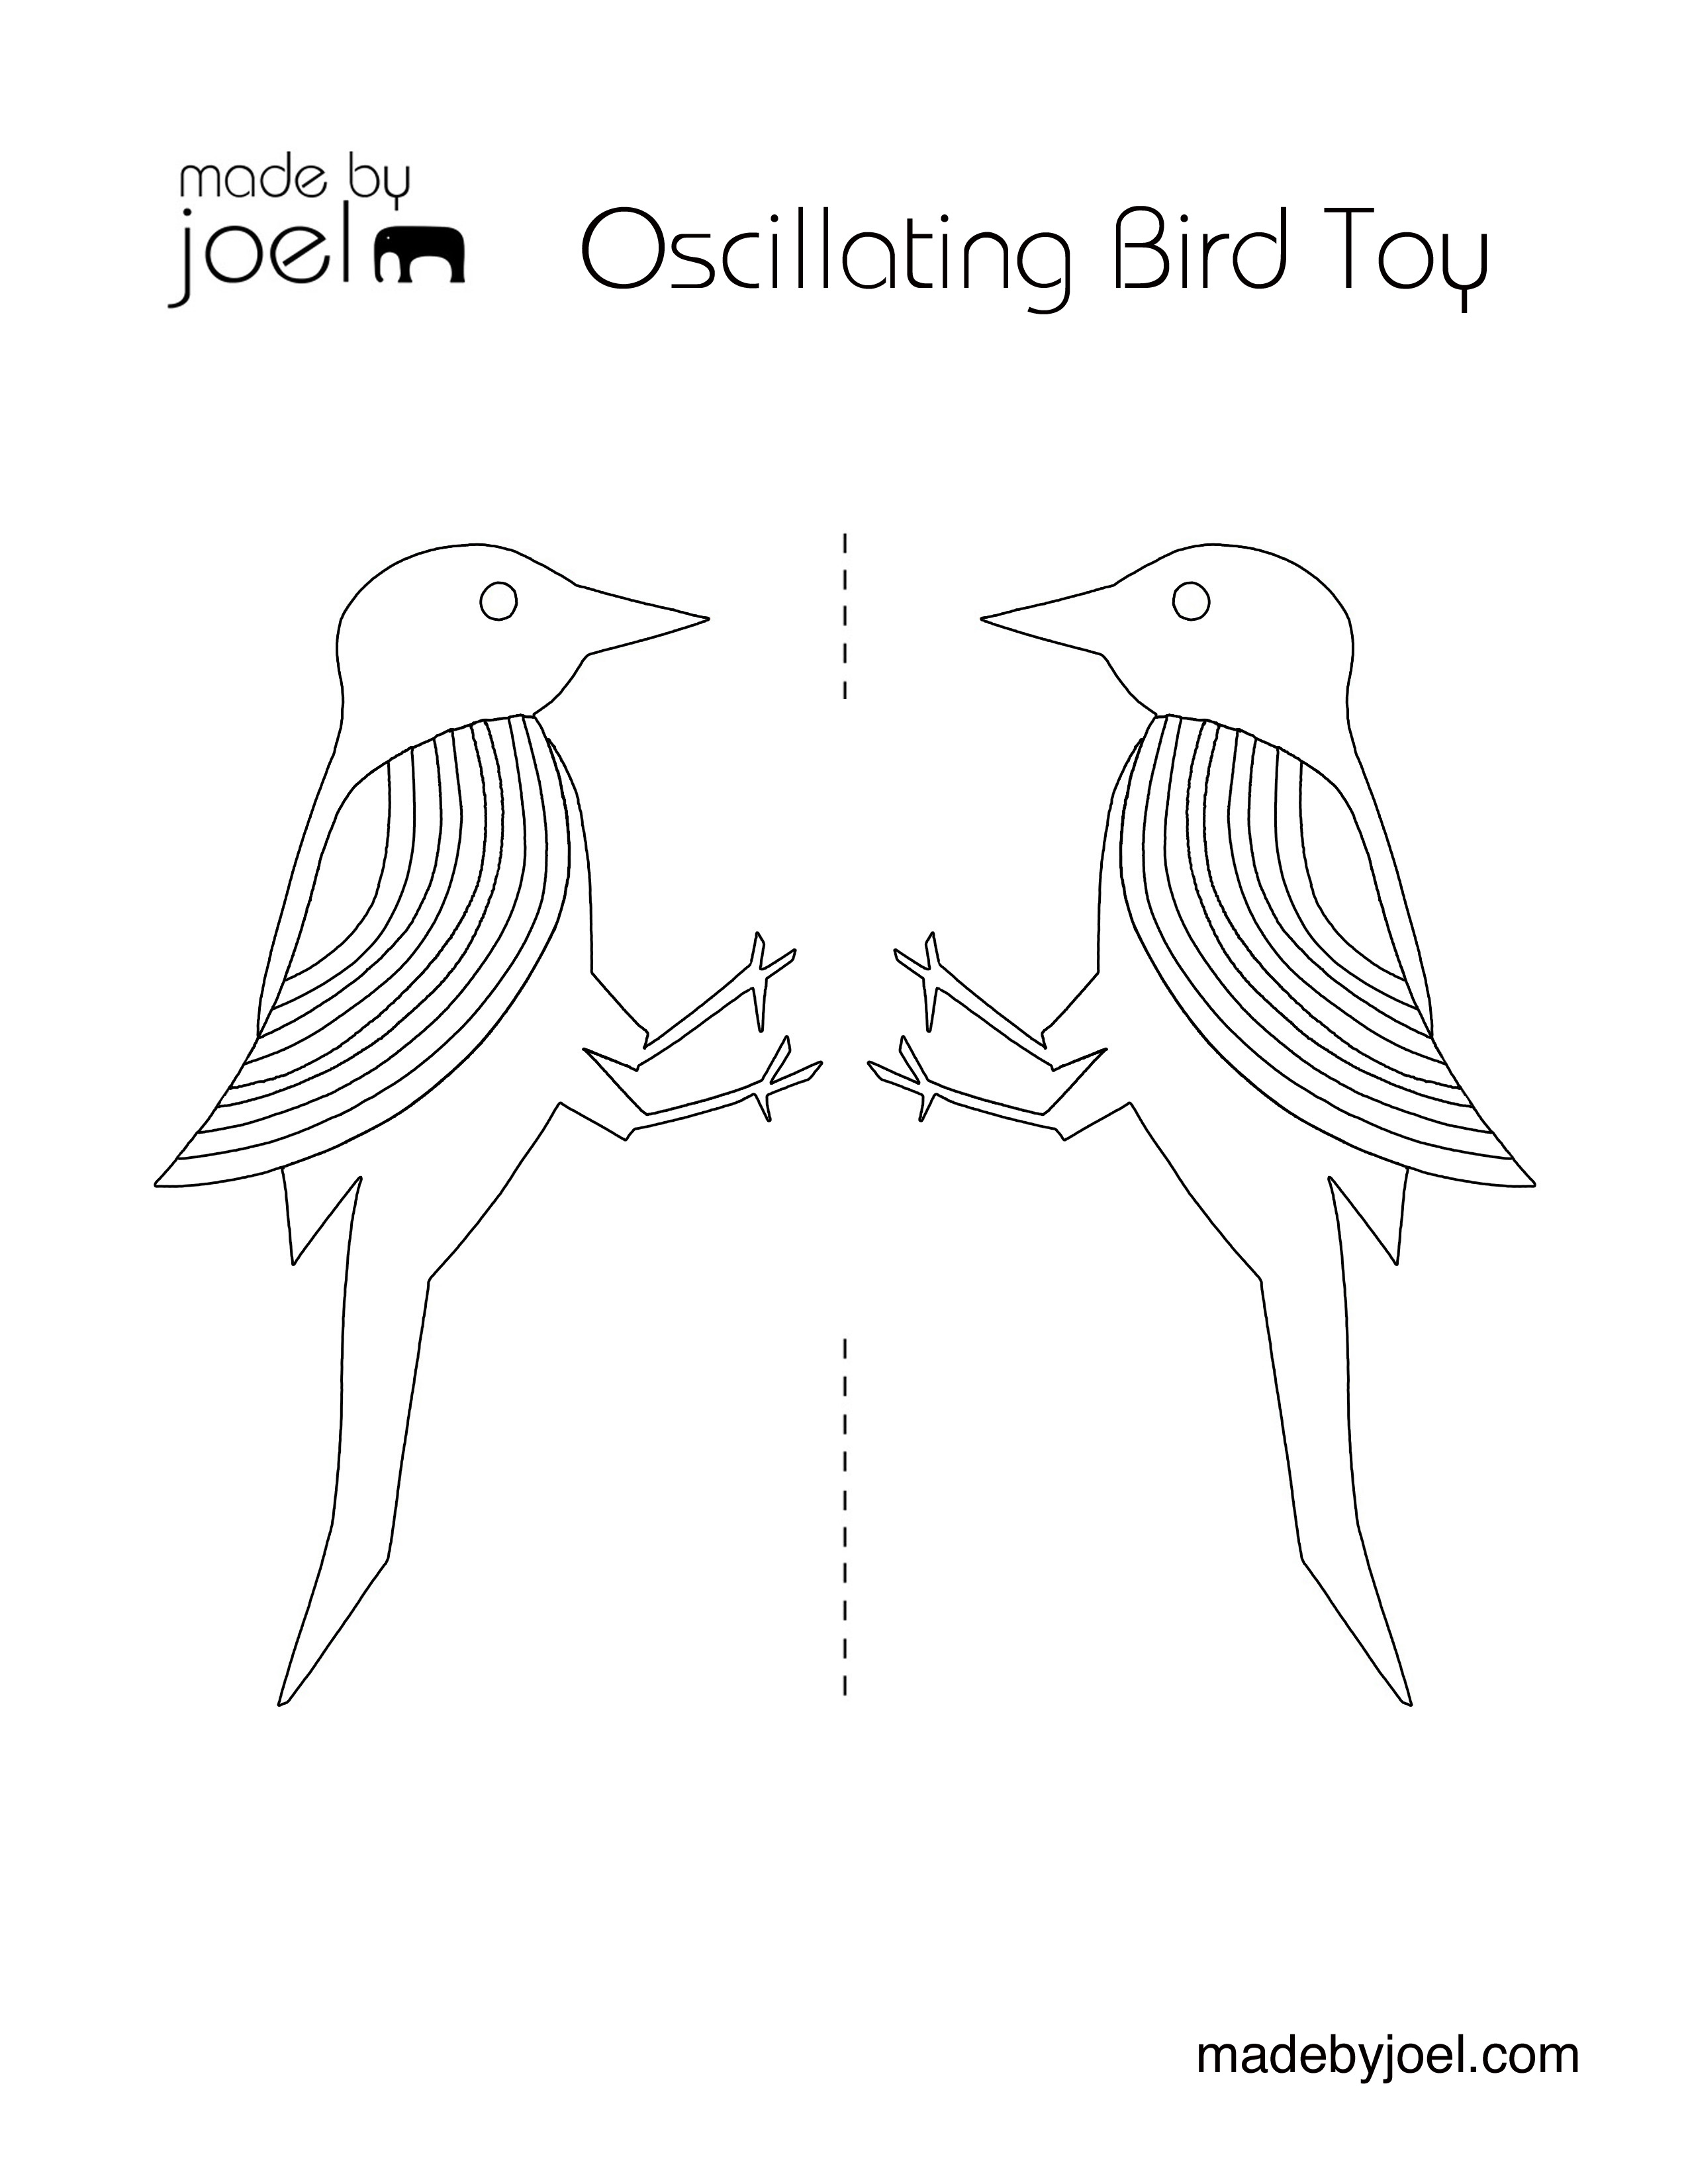 Made by Joel Oscillating Bird Toy Template Coloring Sheet – Made by Joel